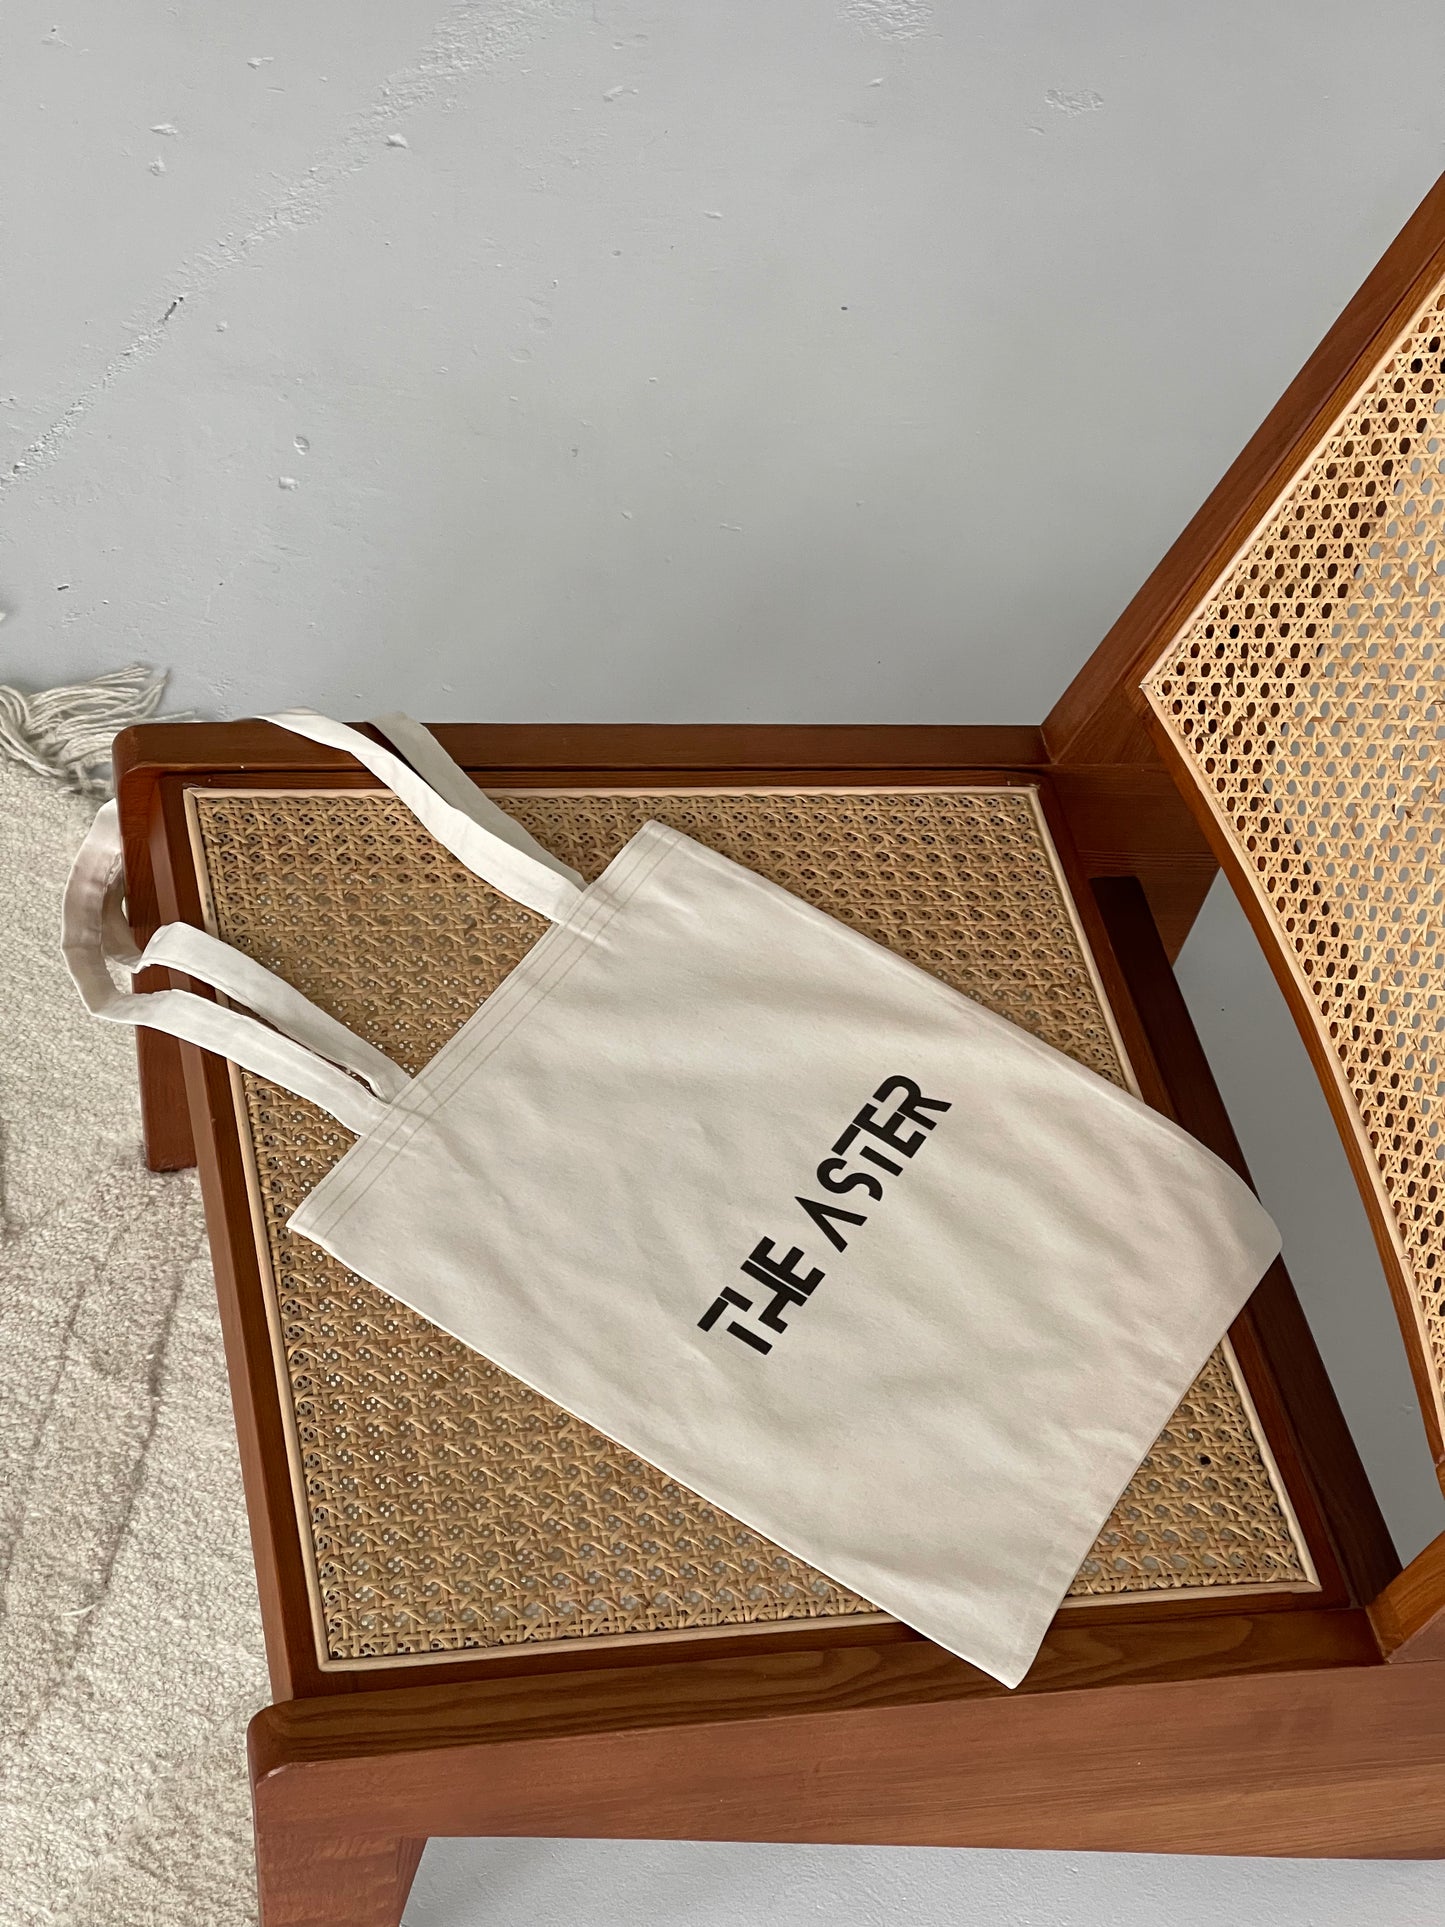 Tote bag "You're doing great"